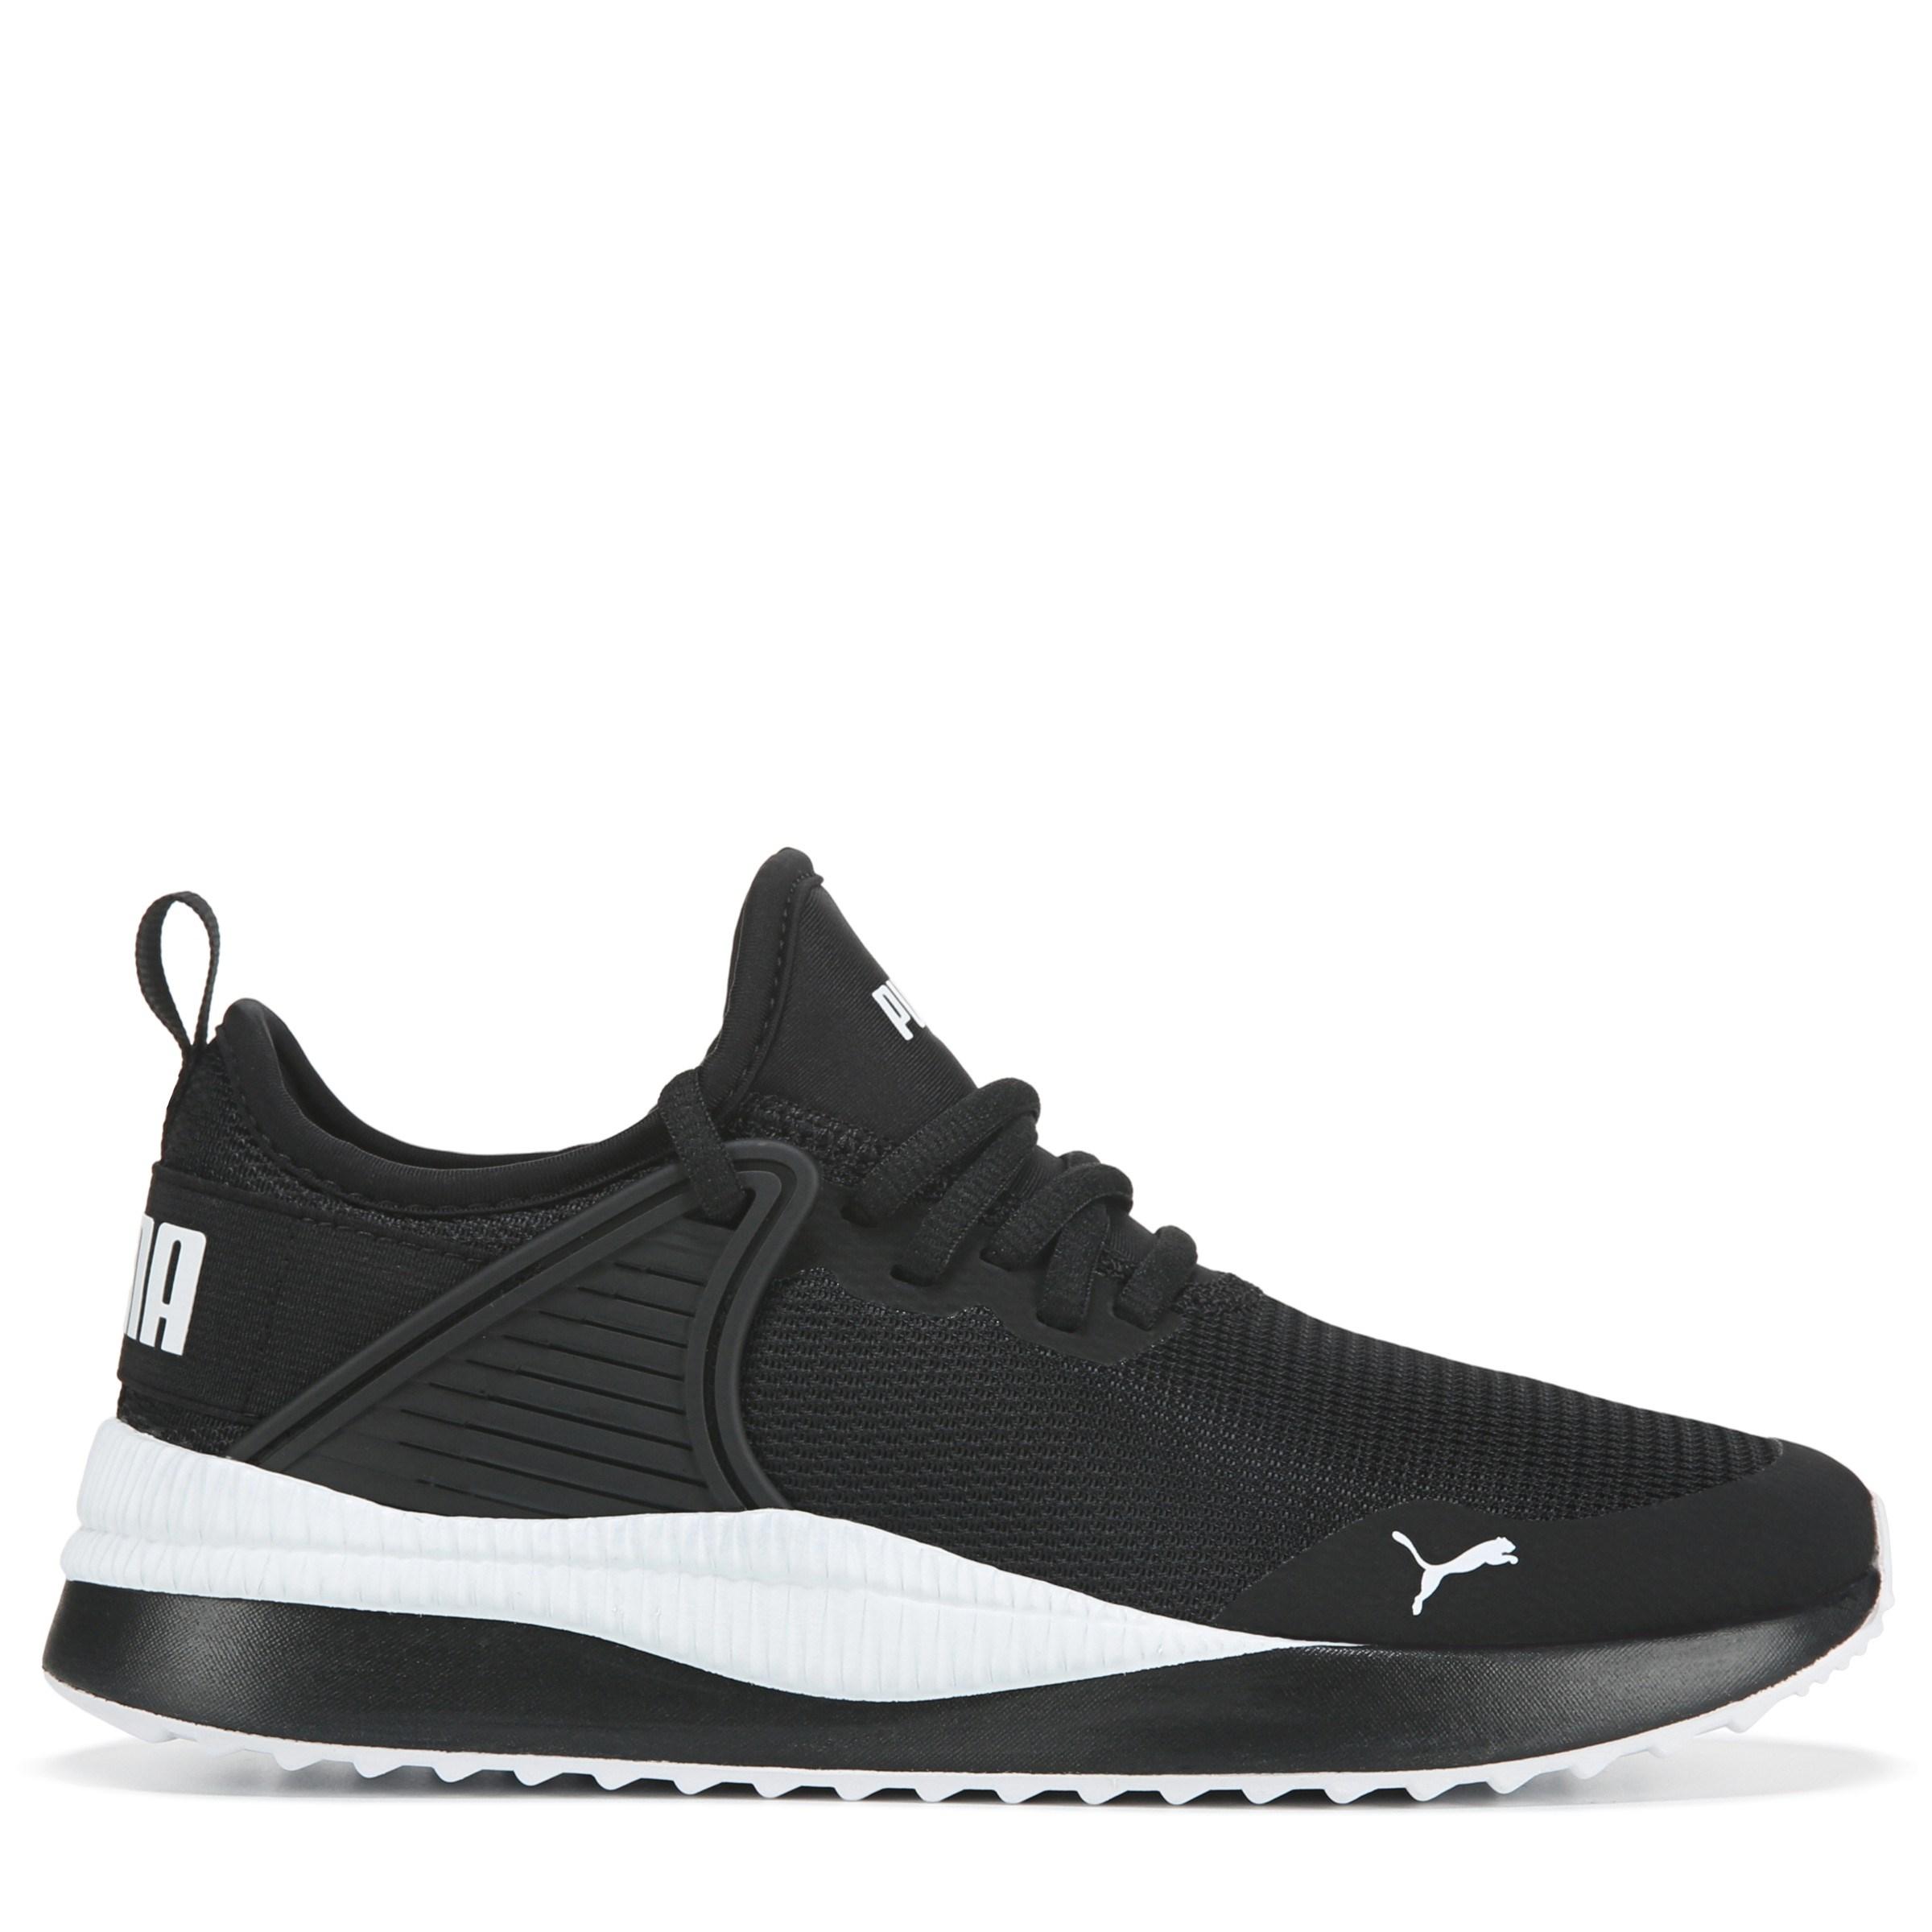 PUMA Rubber Pacer Next Cage Sneakers in Black/White (Black) - Lyst